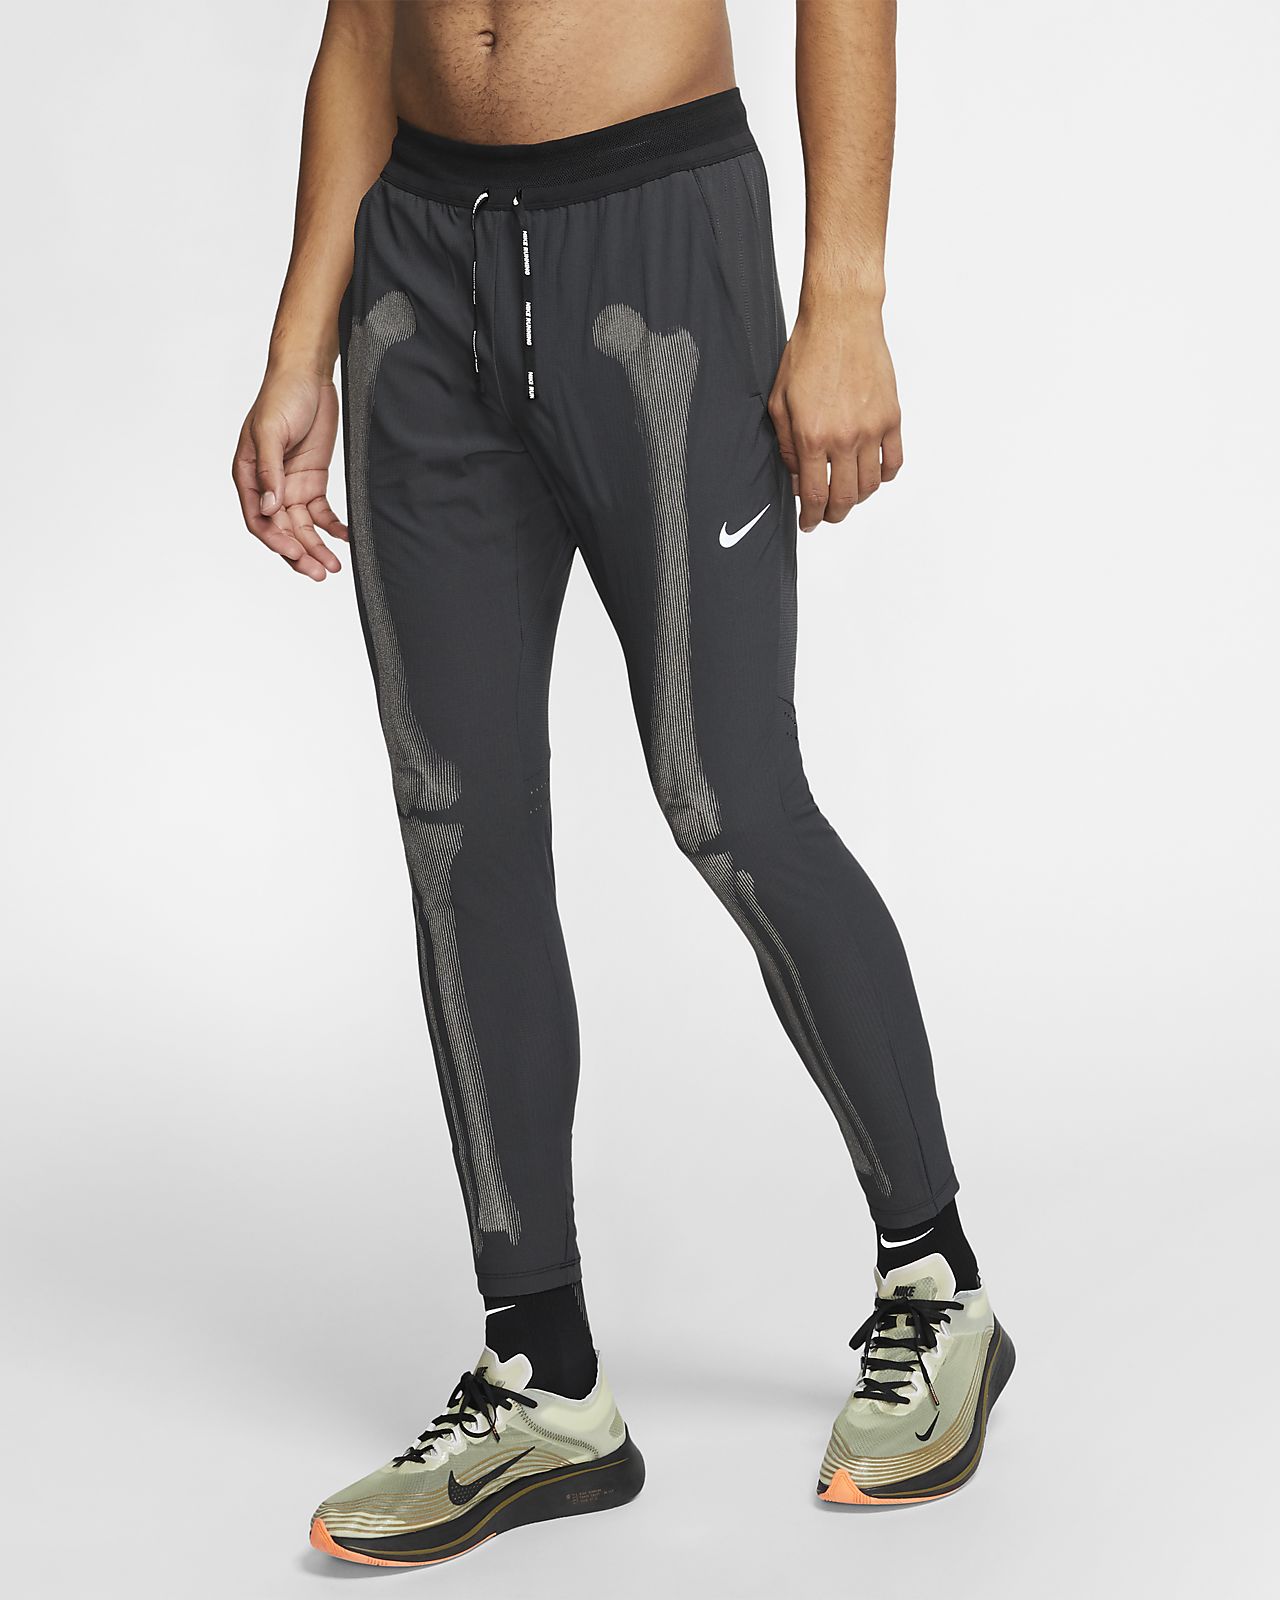 Simple Nike Skeleton Workout Pants for Burn Fat fast | Fitness and ...